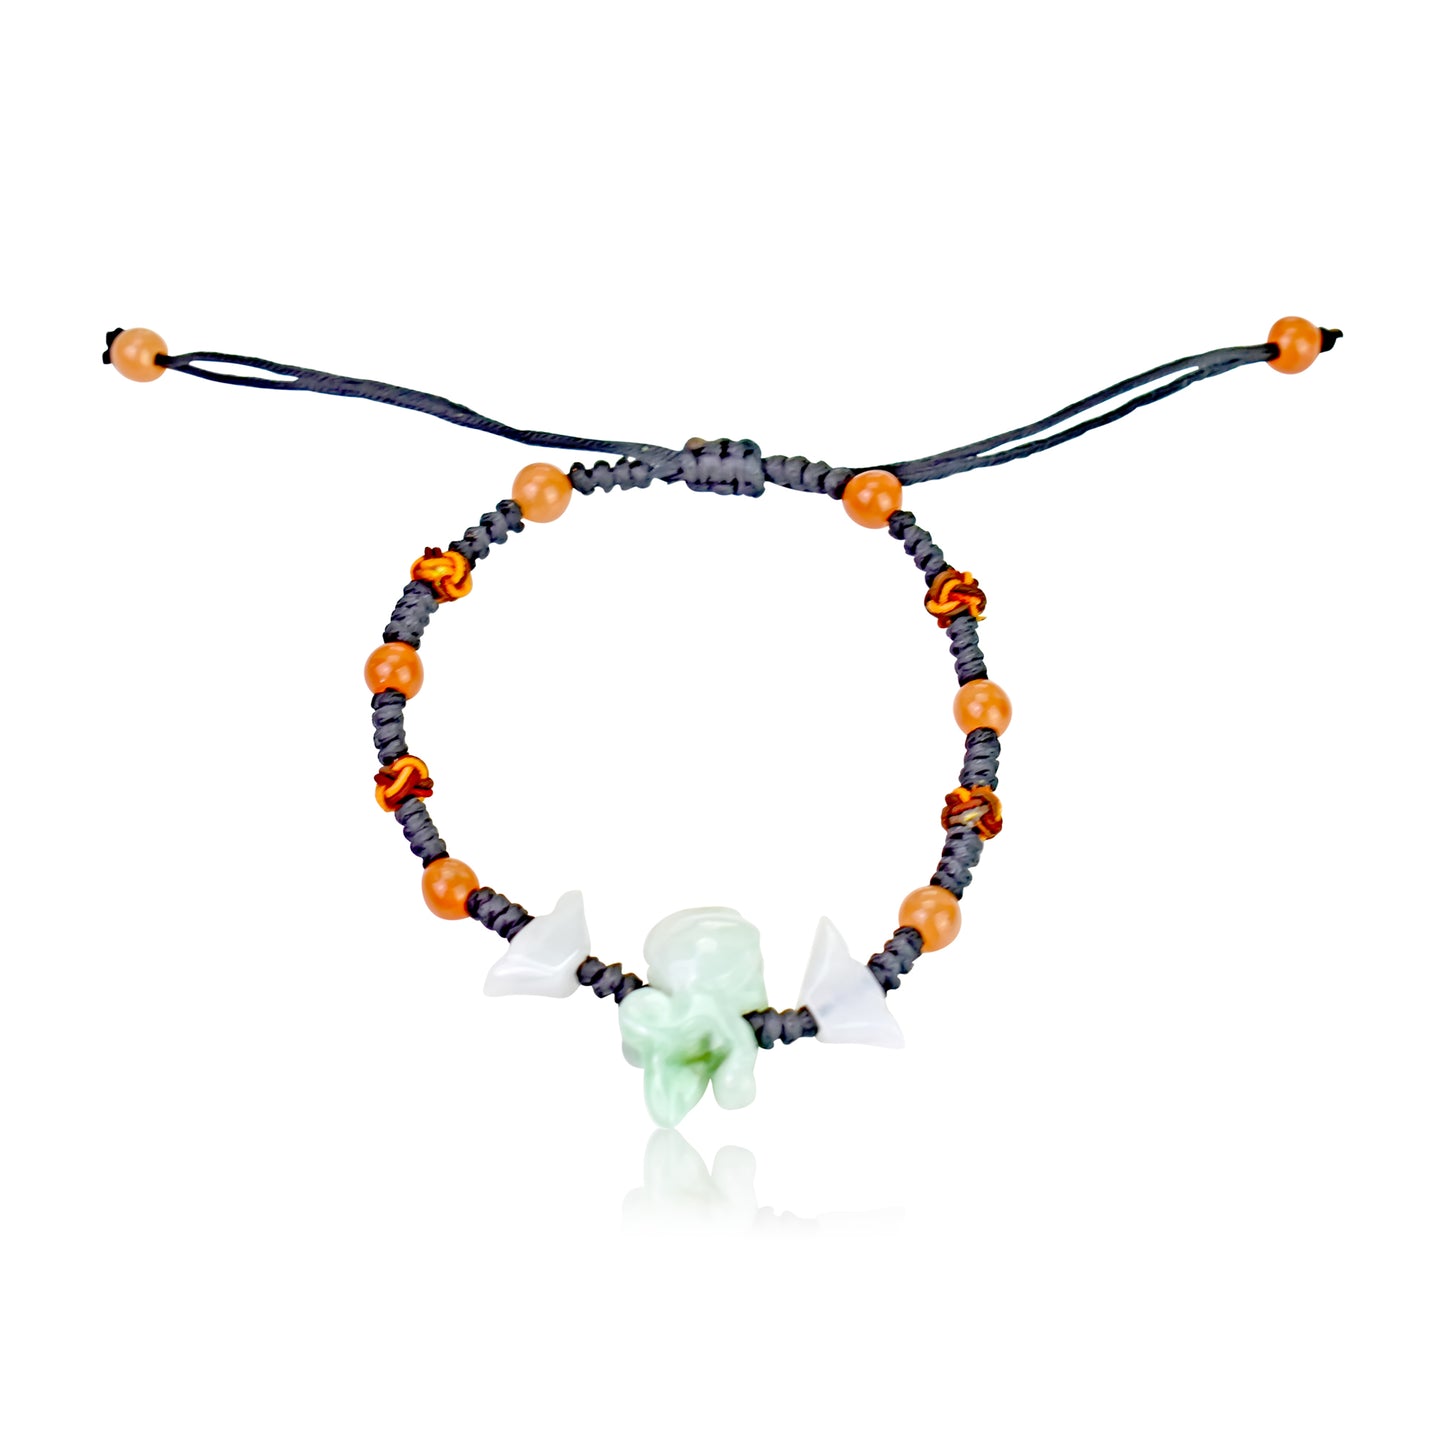 Become Ambitious with a Rat Symbolized Jade Bracelet made with Black Cord